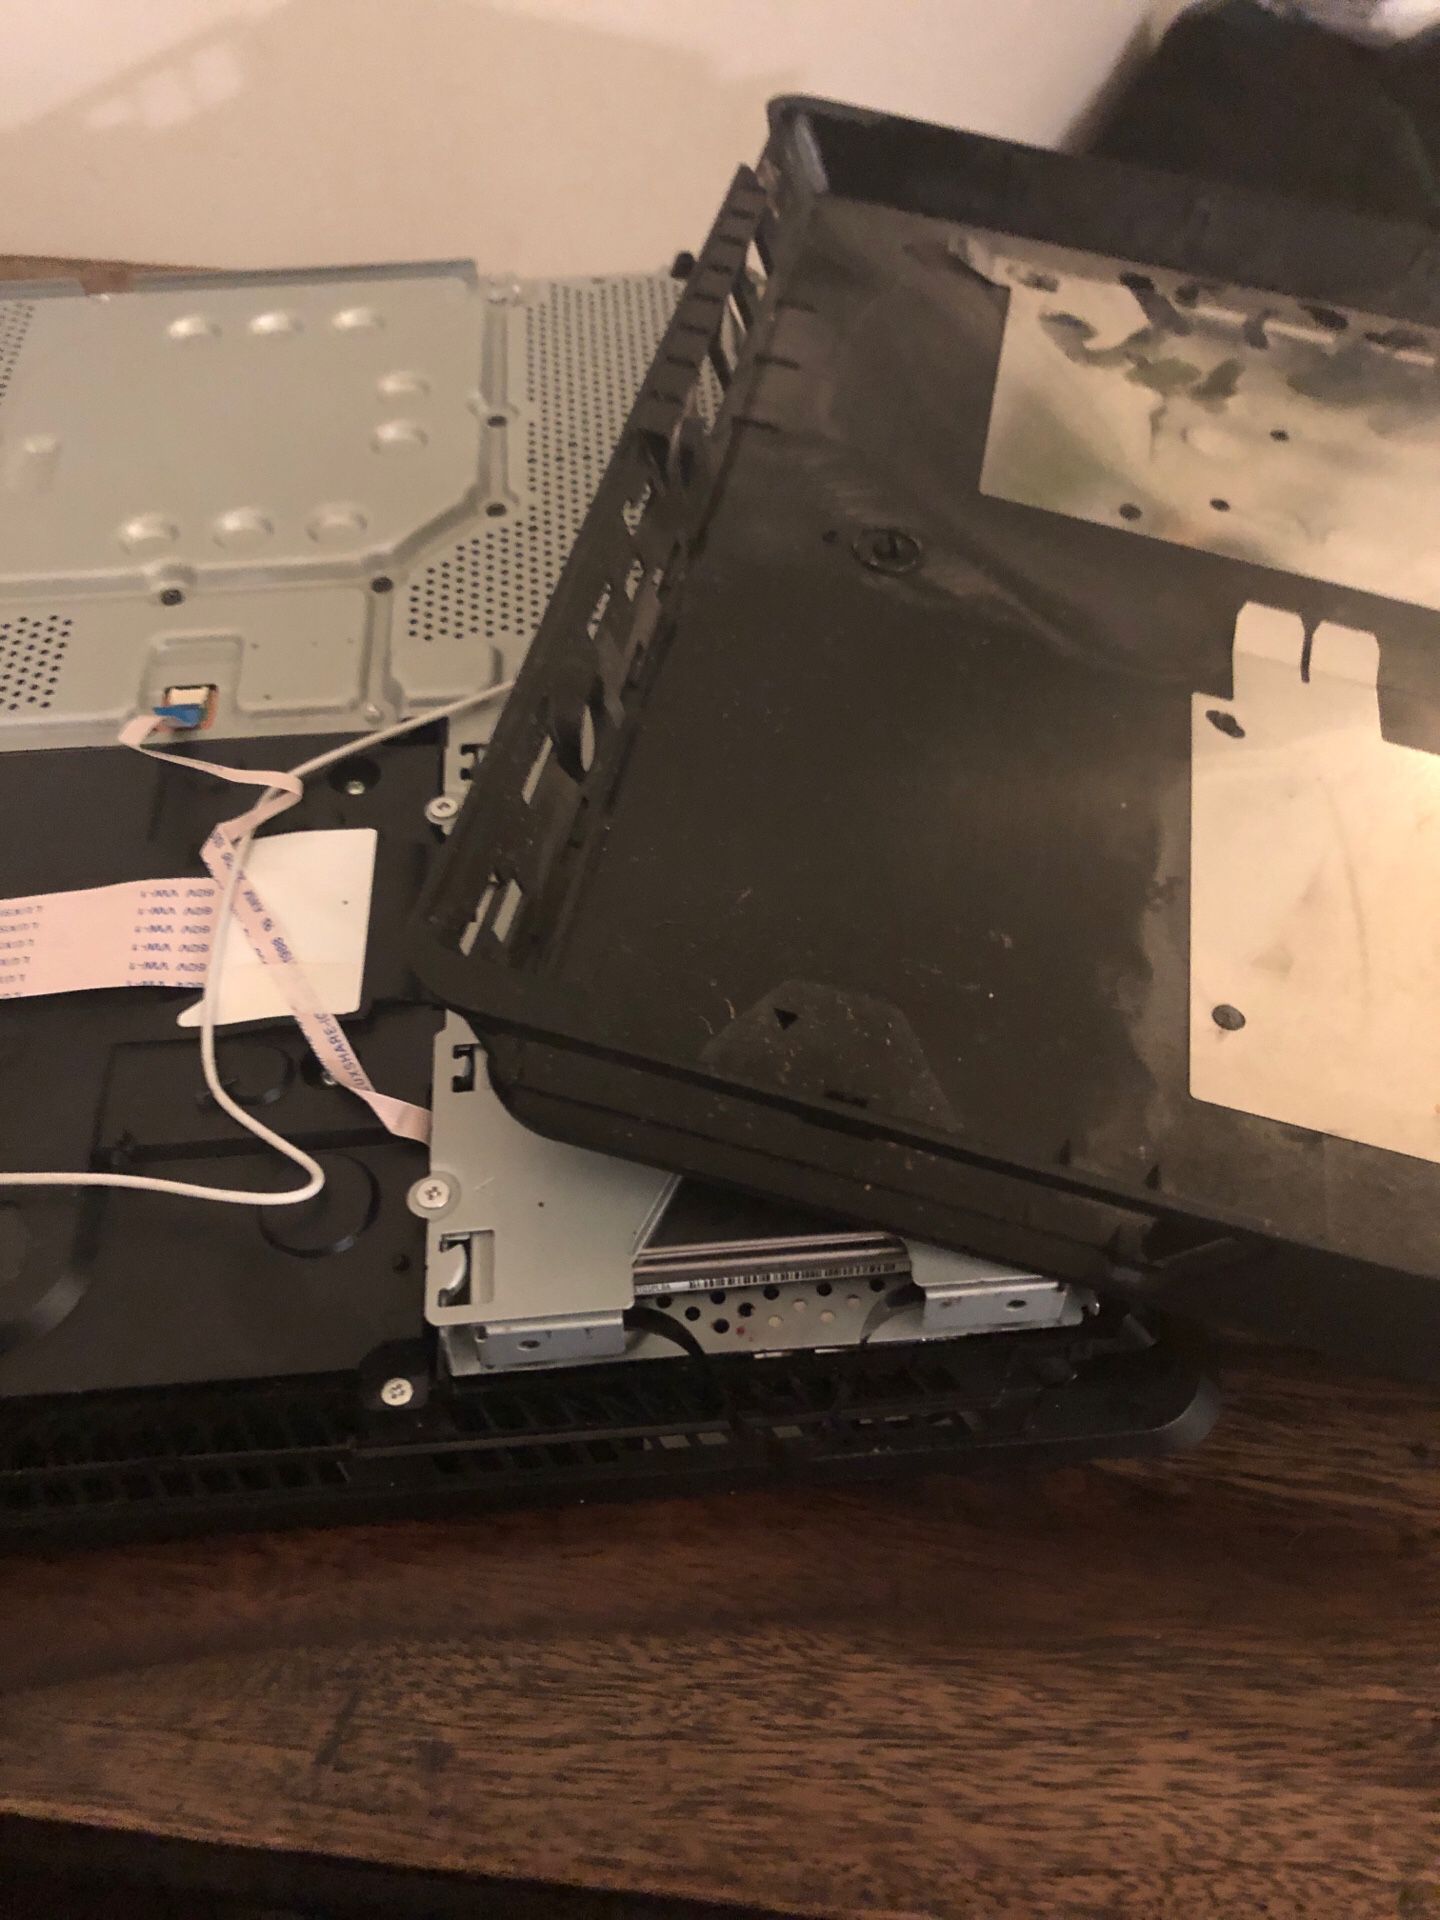 PS4 slim broken ( if you want some parts here it is and including the battery) alright I lowers the price three time satisfied